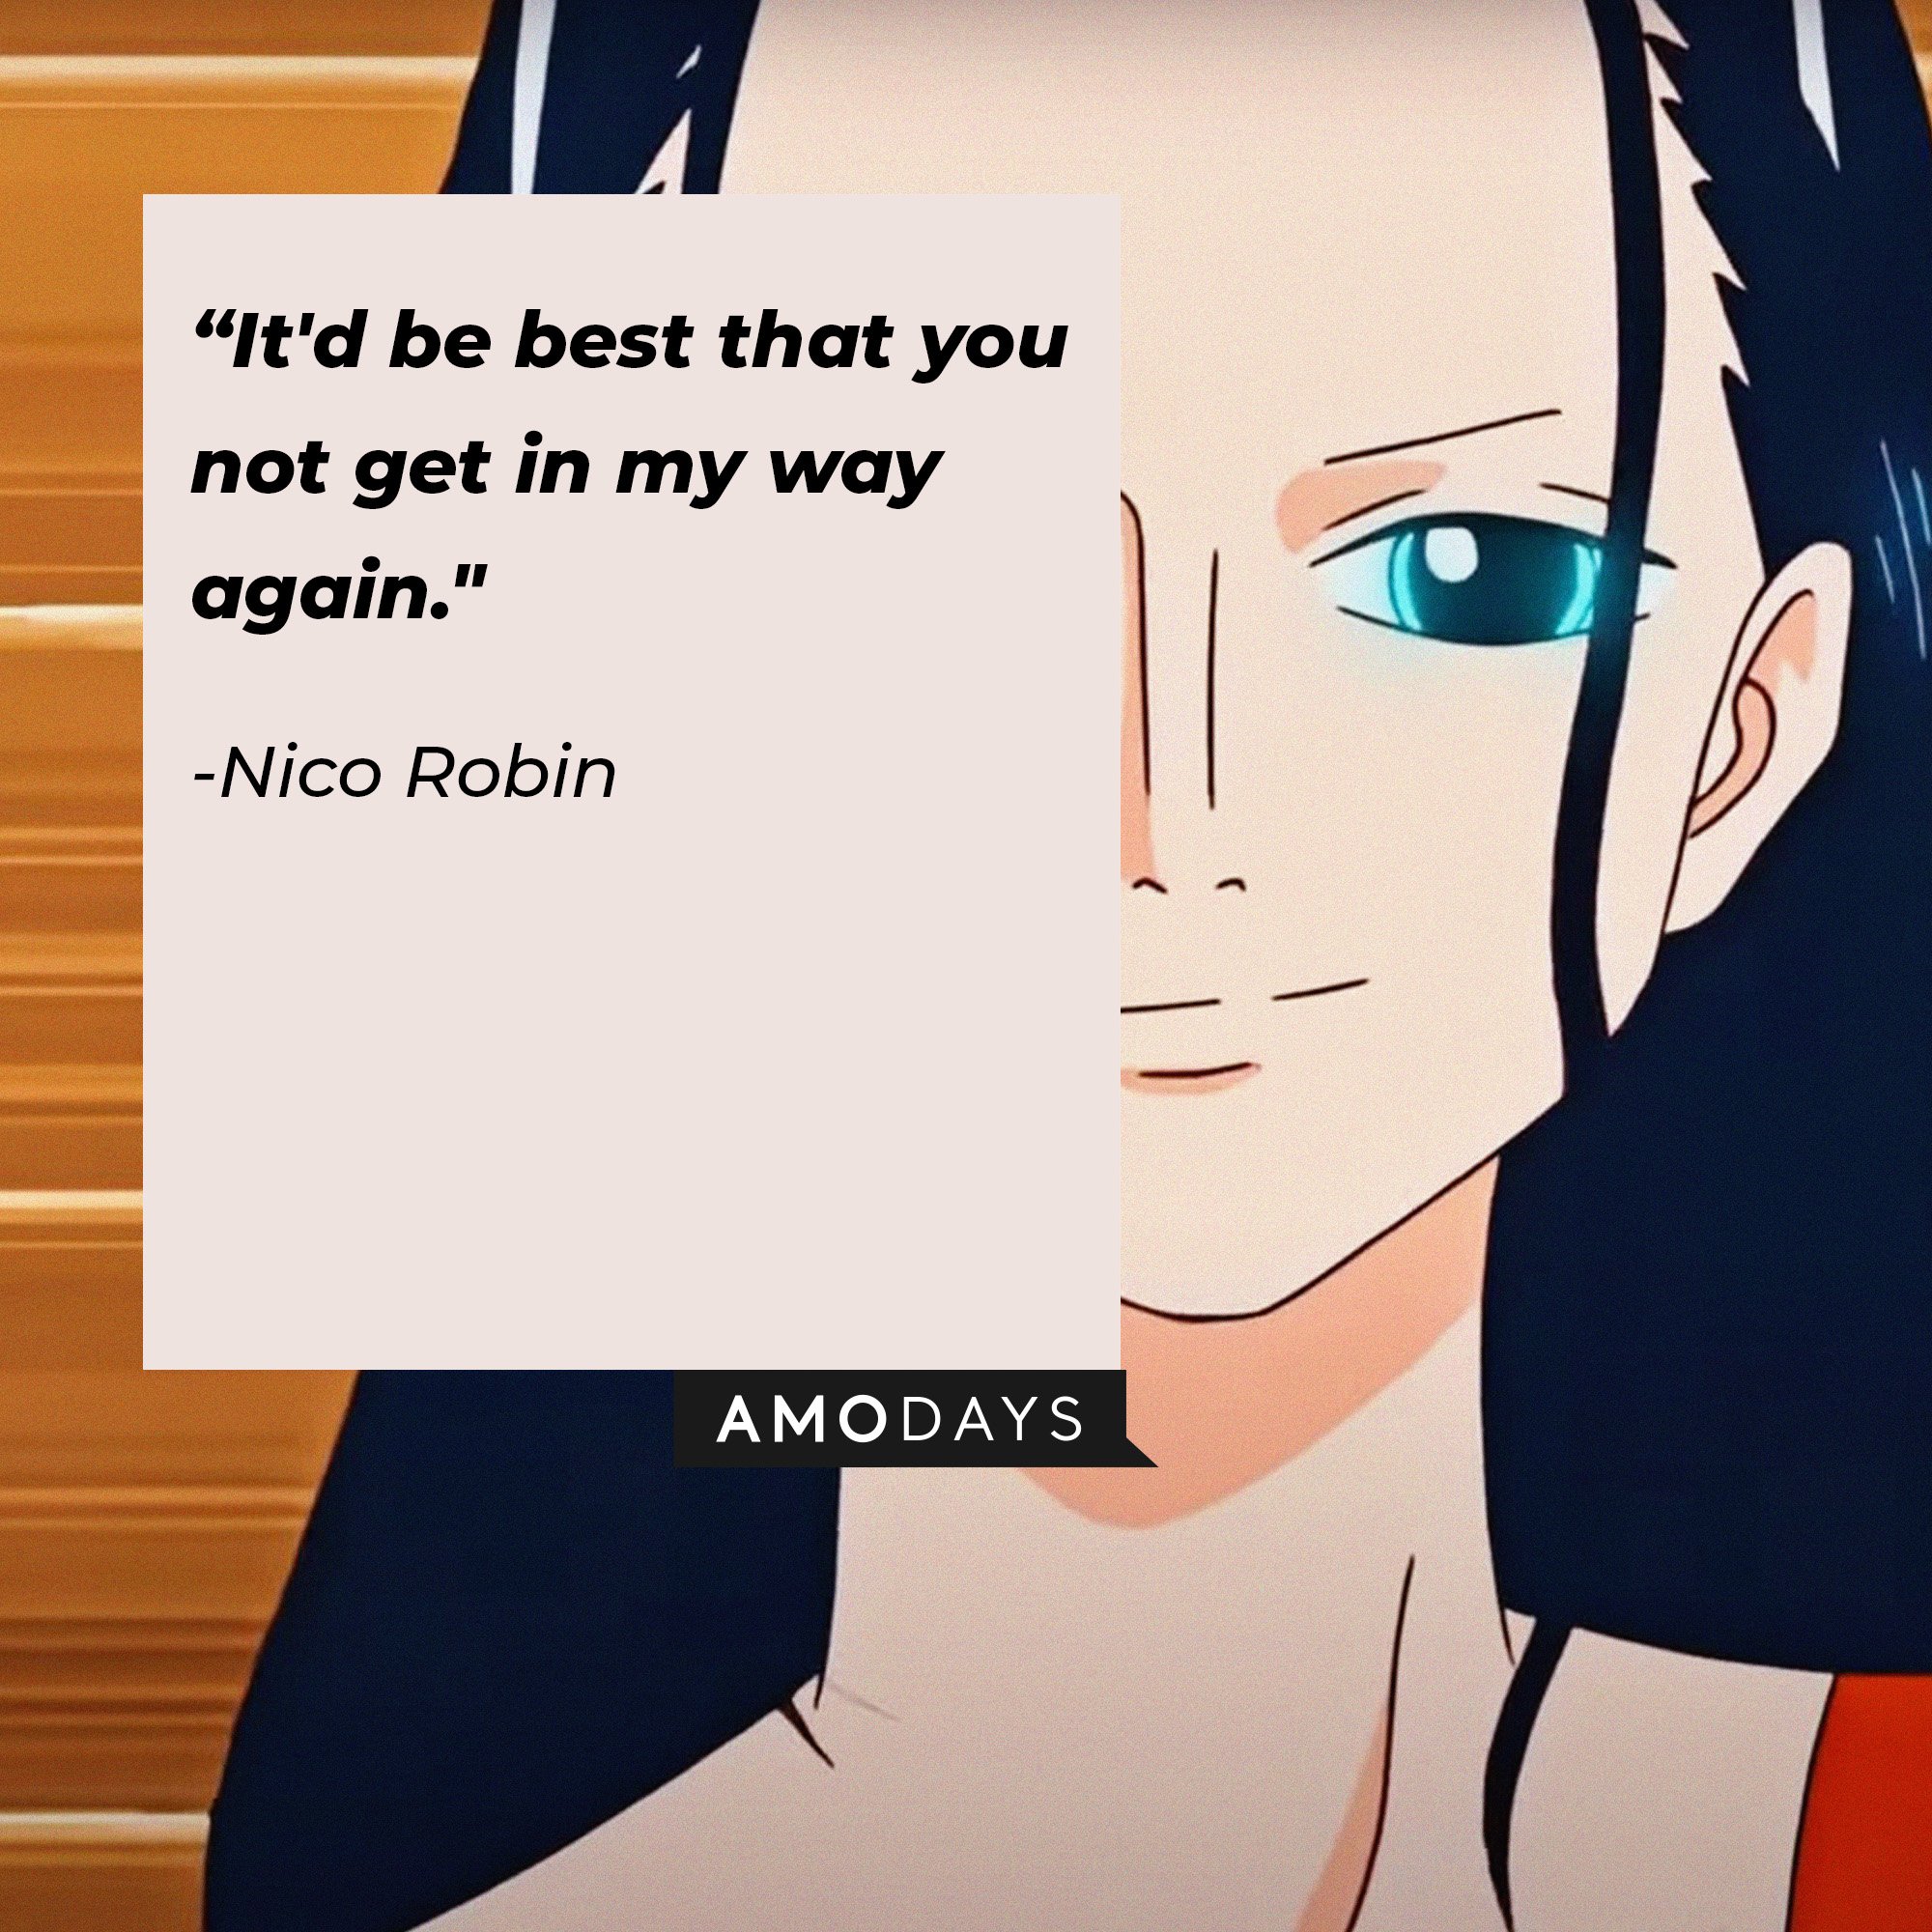 Nico Robin’s quote: "It'd be best that you not get in my way again." | Image: AmoDays